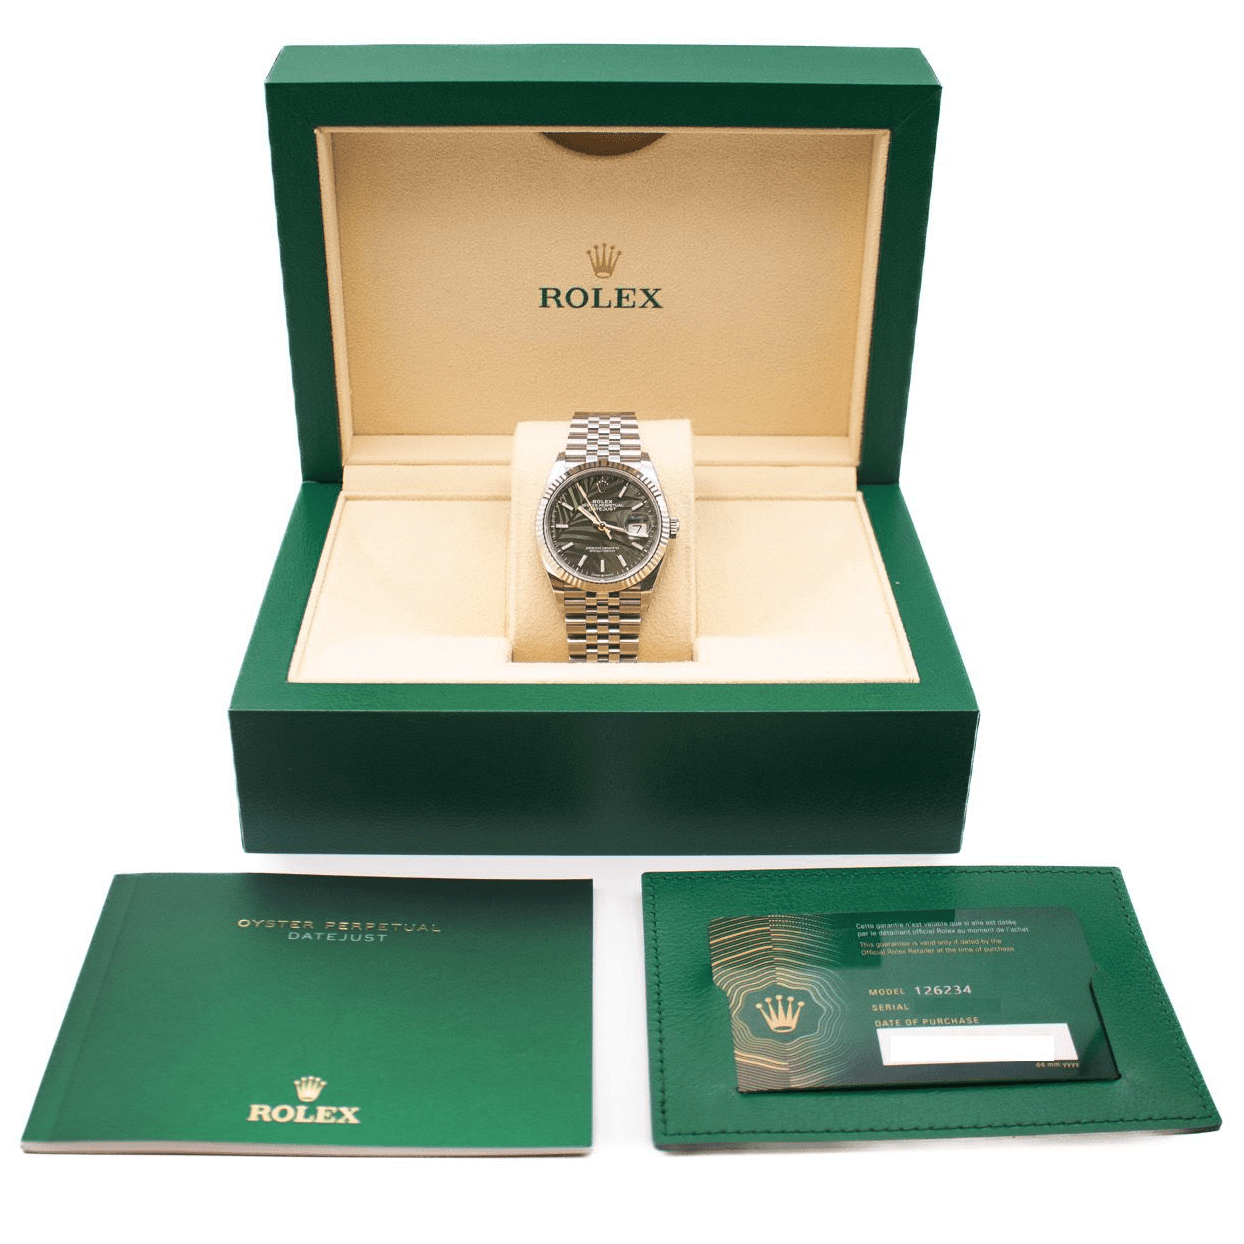 Rolex Datejust 36 in box with certificates